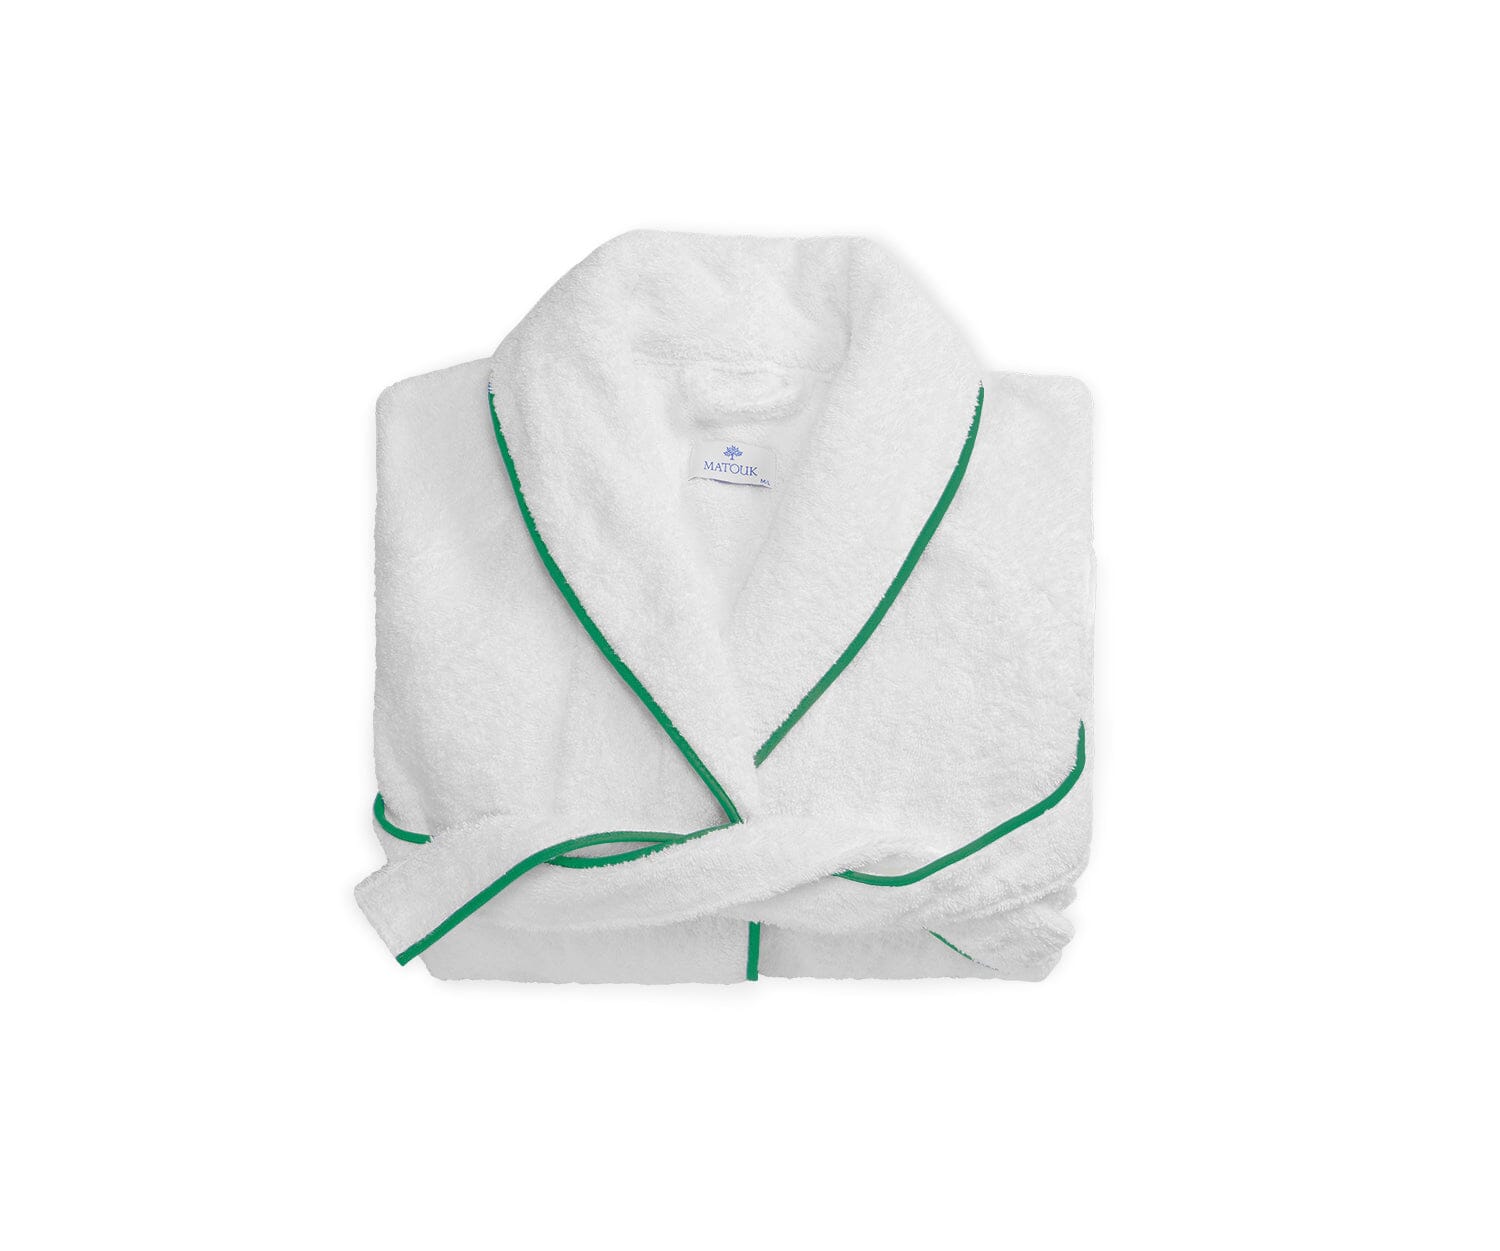 Cairo Robe in White with Kelly Green Tape | Matouk Robes at Fig Linens and Home